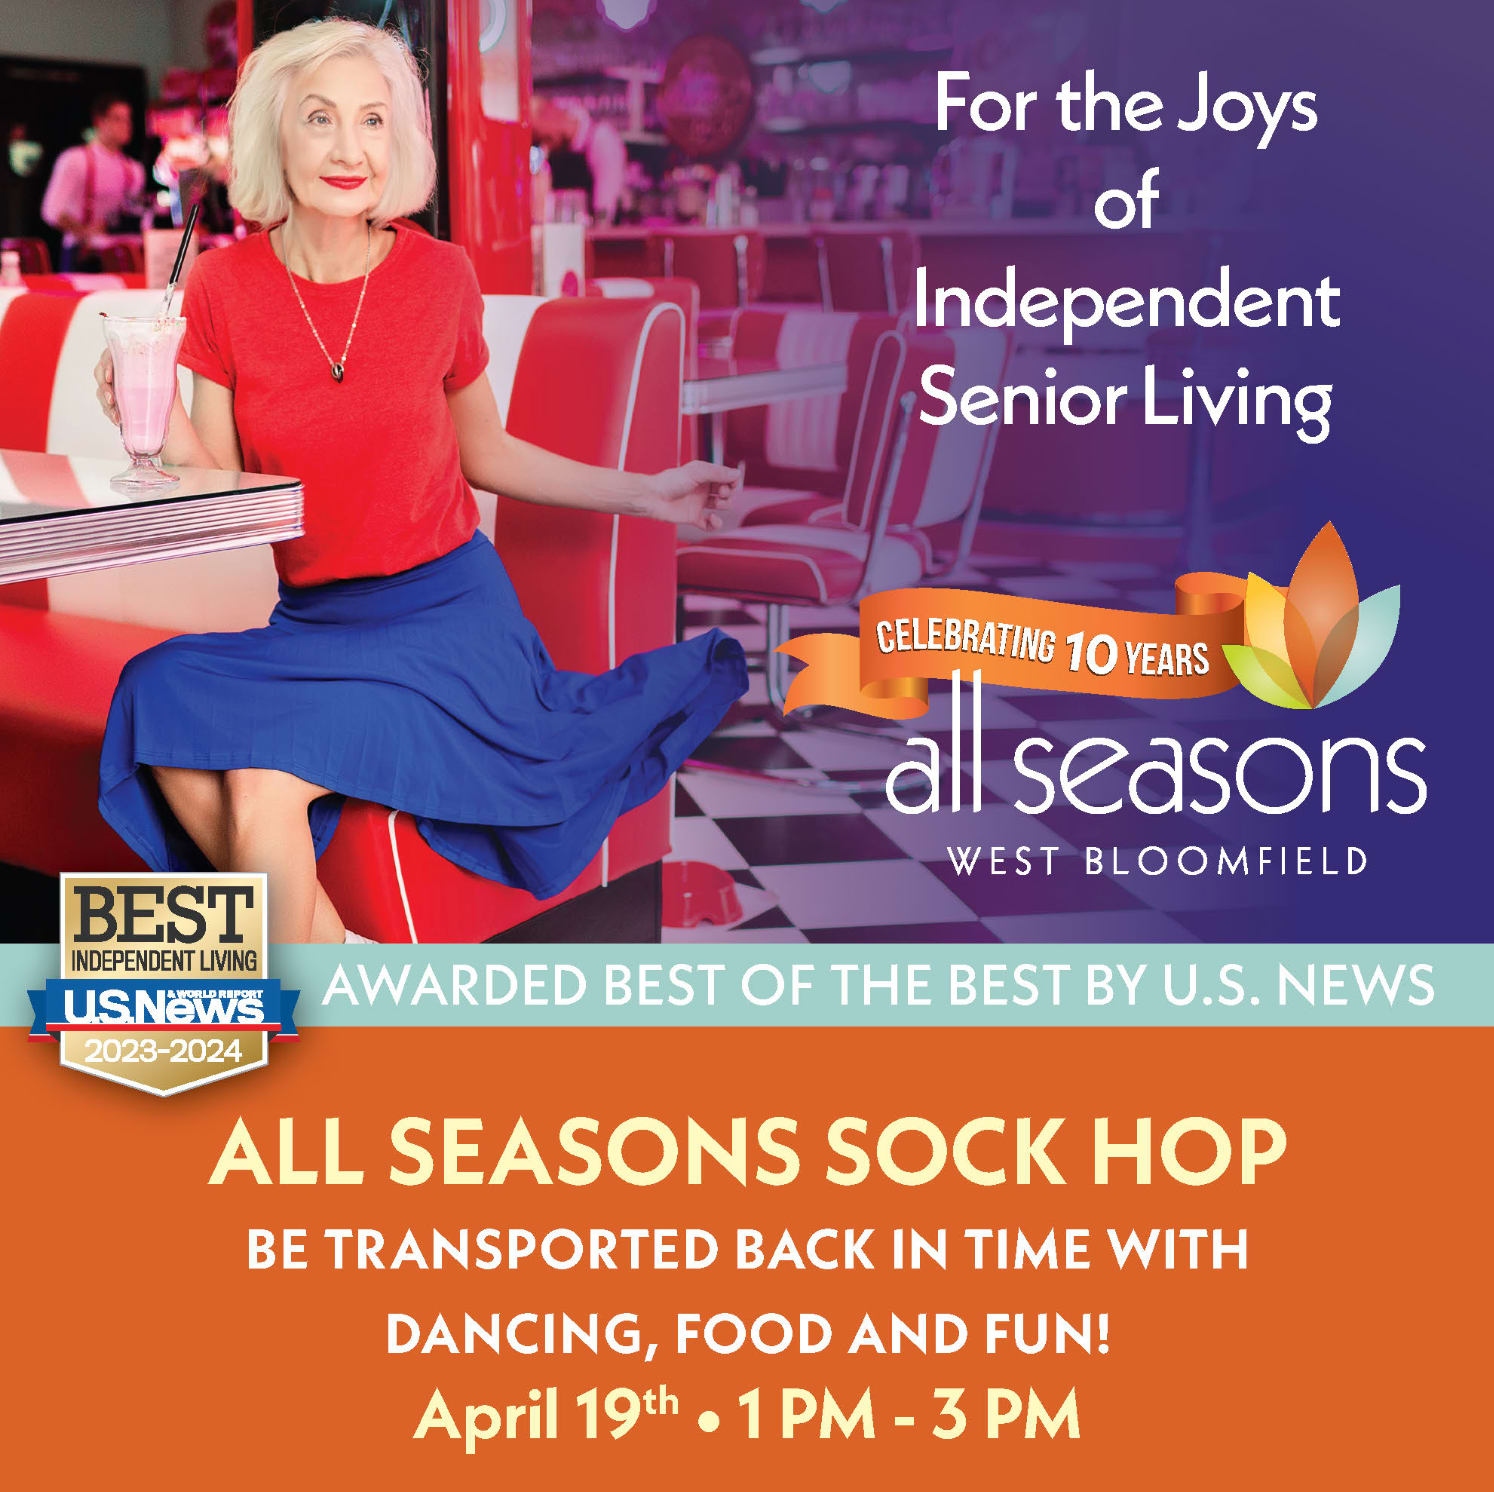 All Seasons Sock Hop with All Seasons West Bloomfield graphic